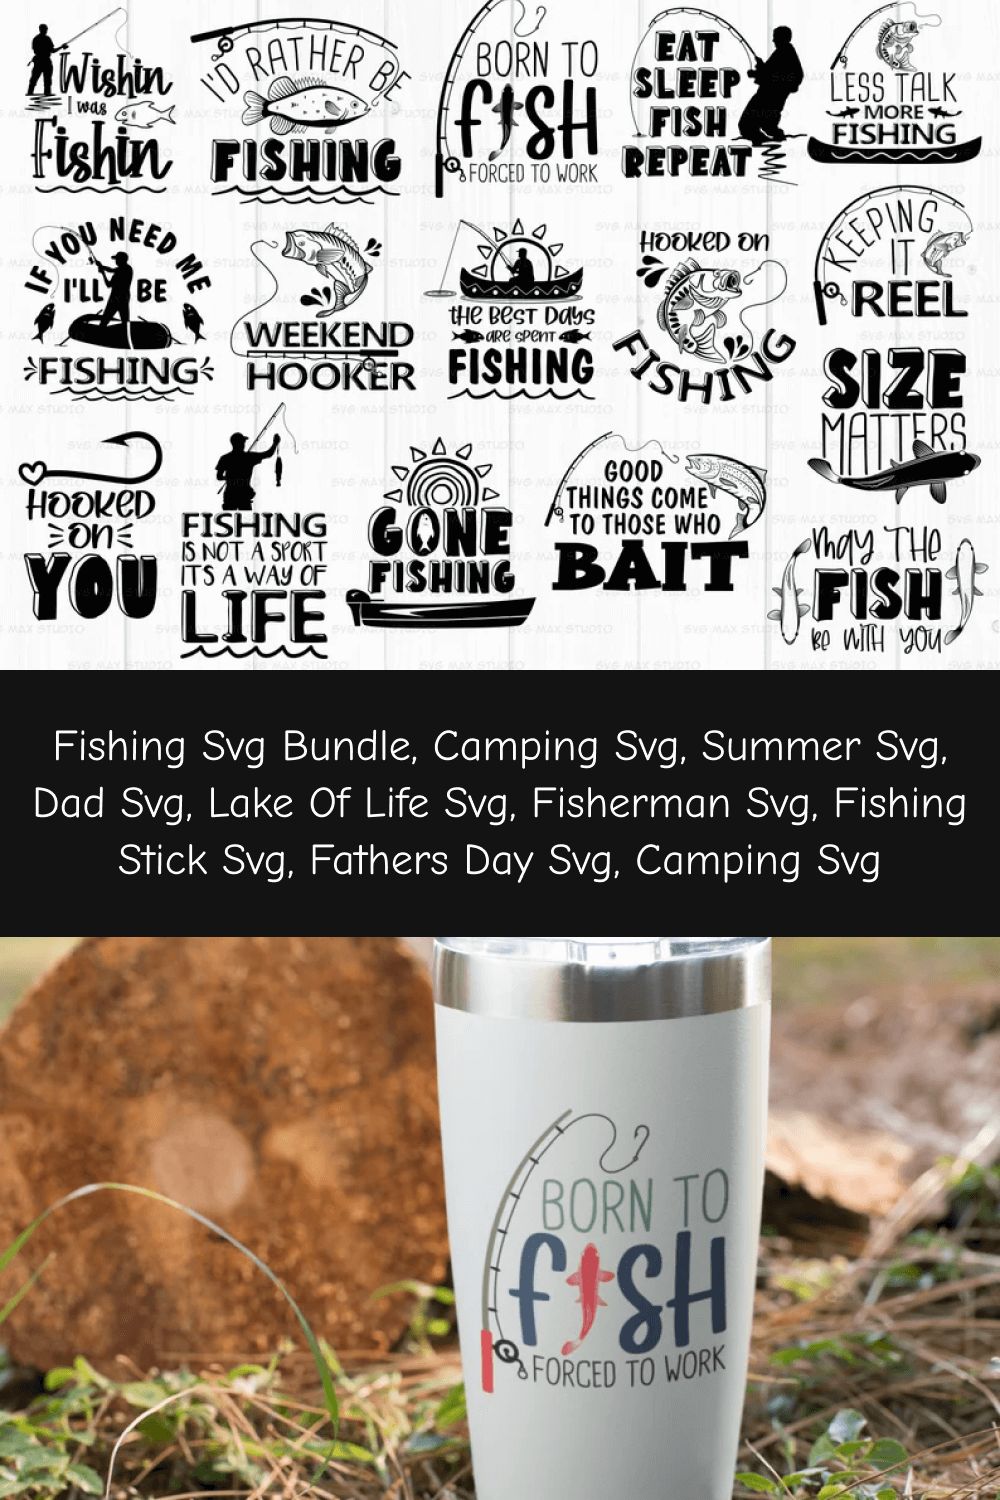 Fathers day svg camping svg pinterest.